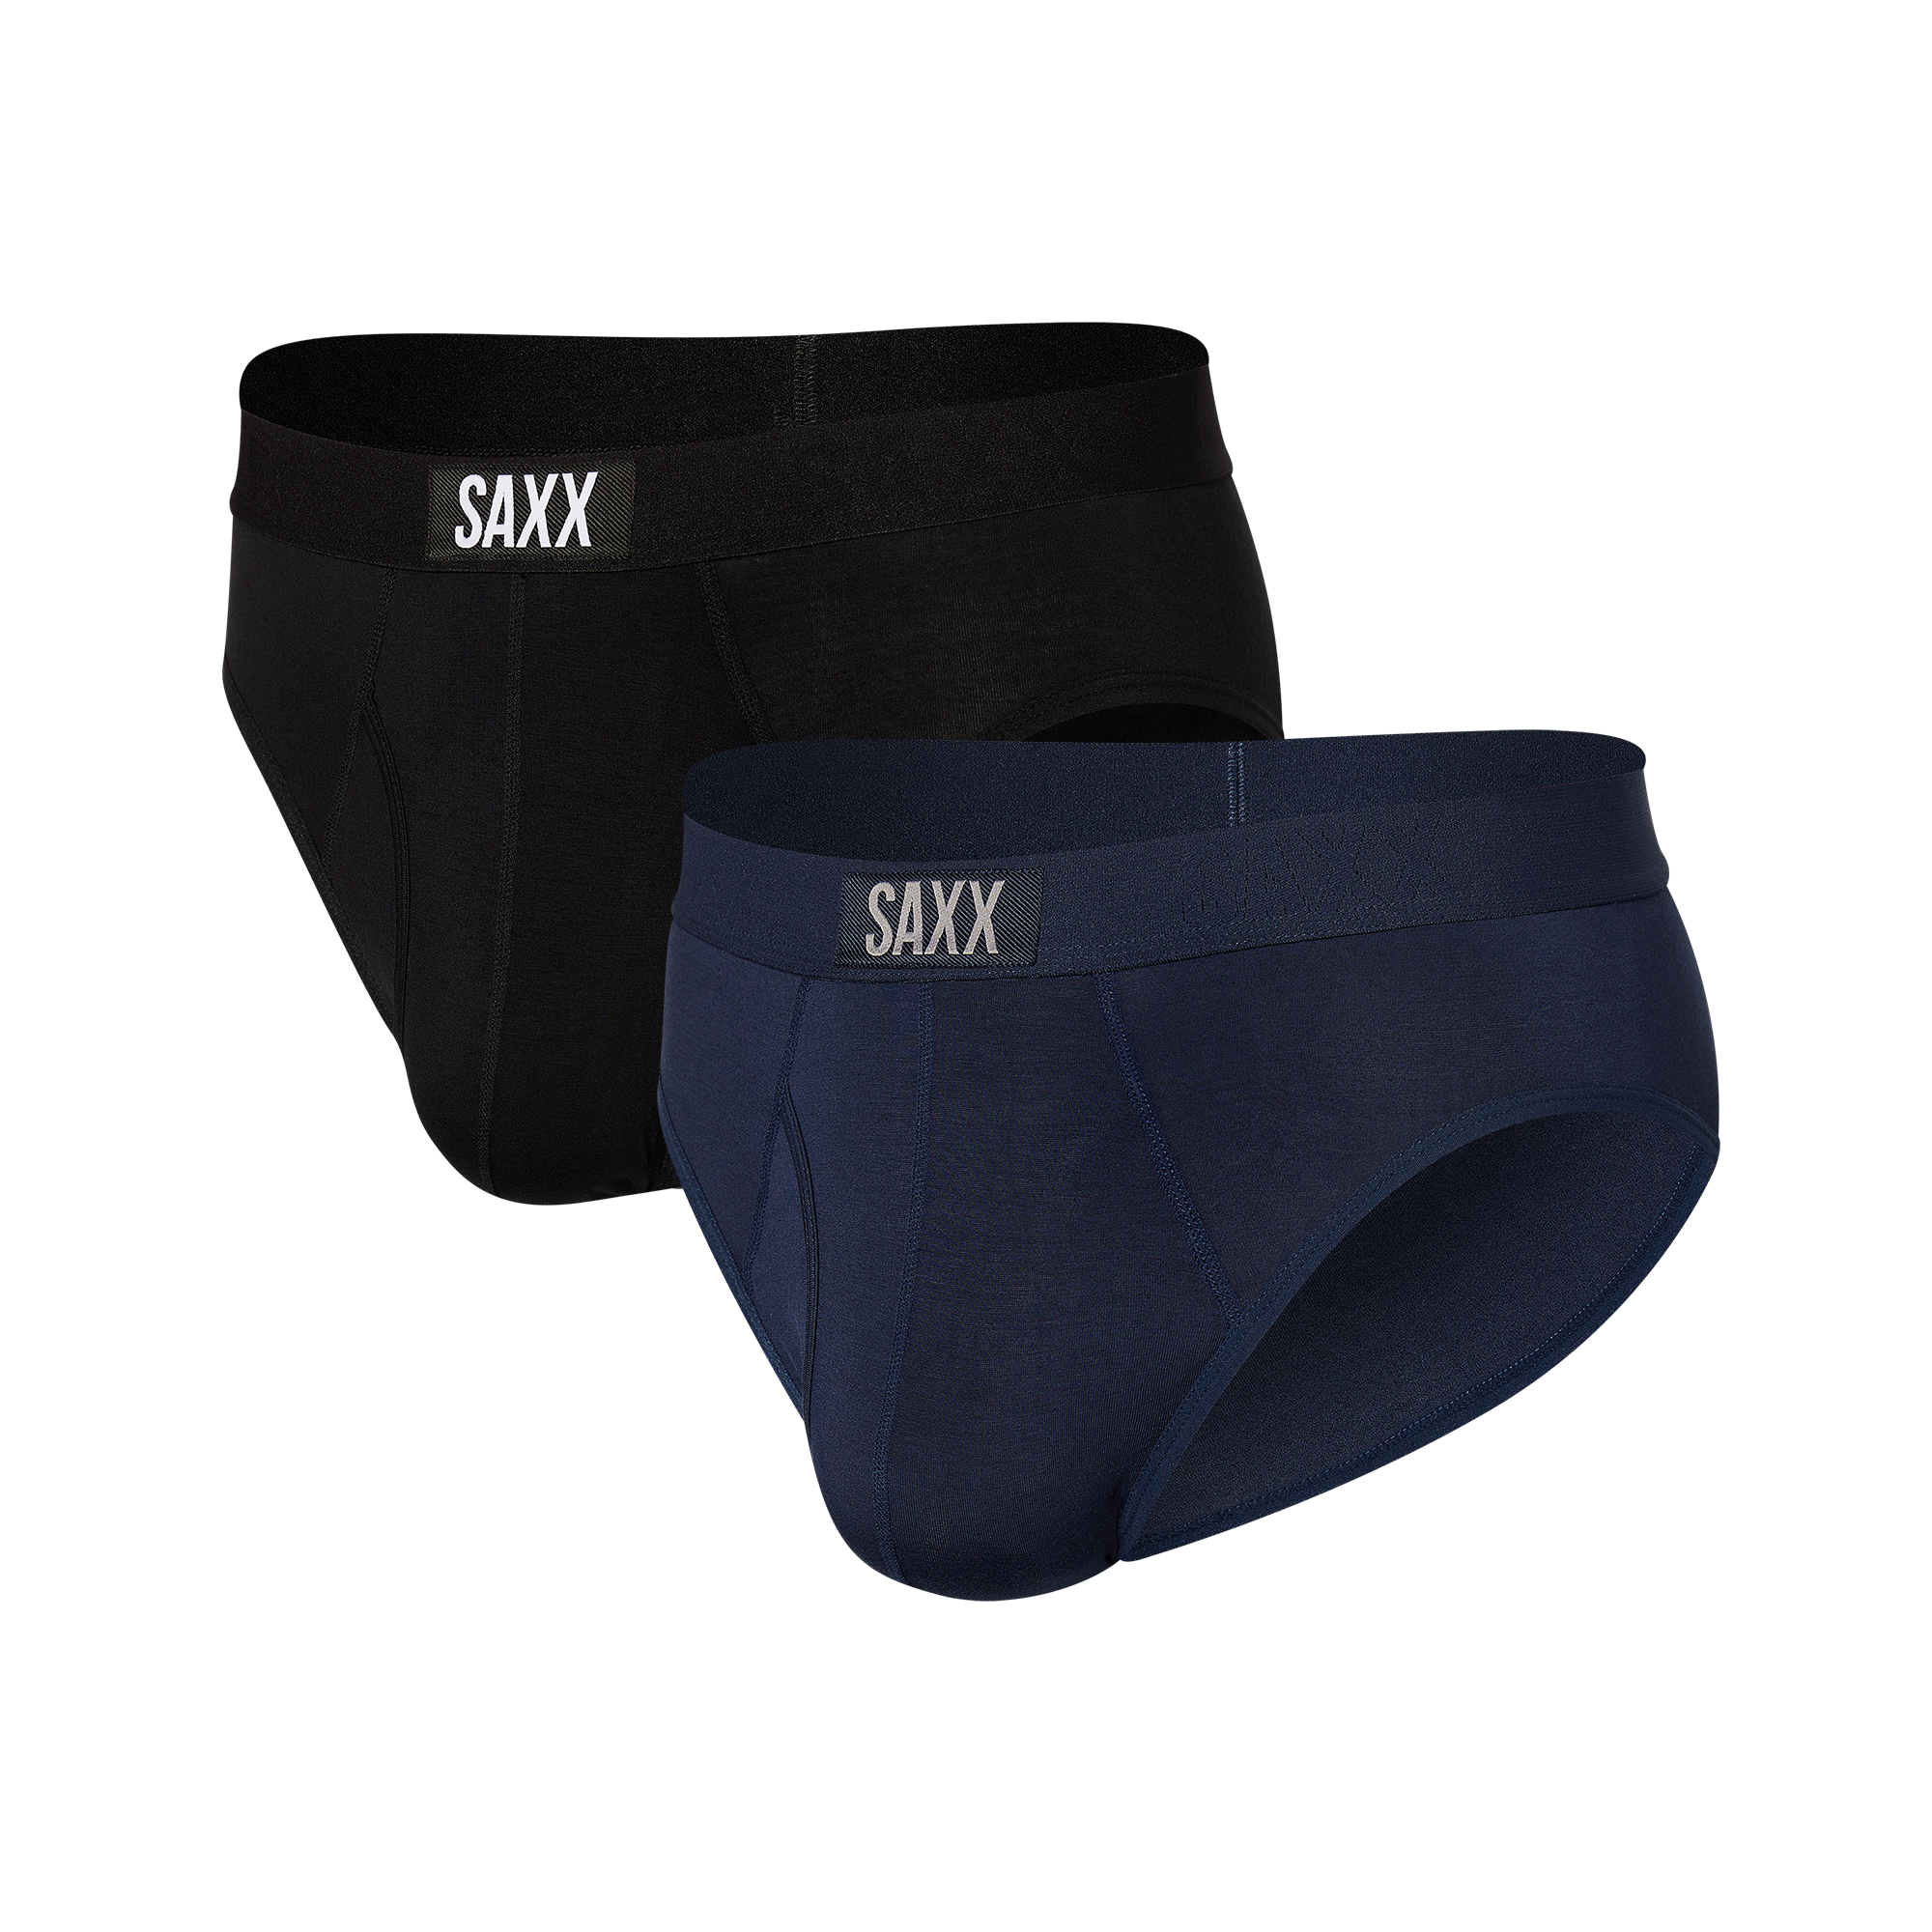 Saxx Ultra Super Soft 2 Pack Briefs - Black / Navy – Trunks and Boxers